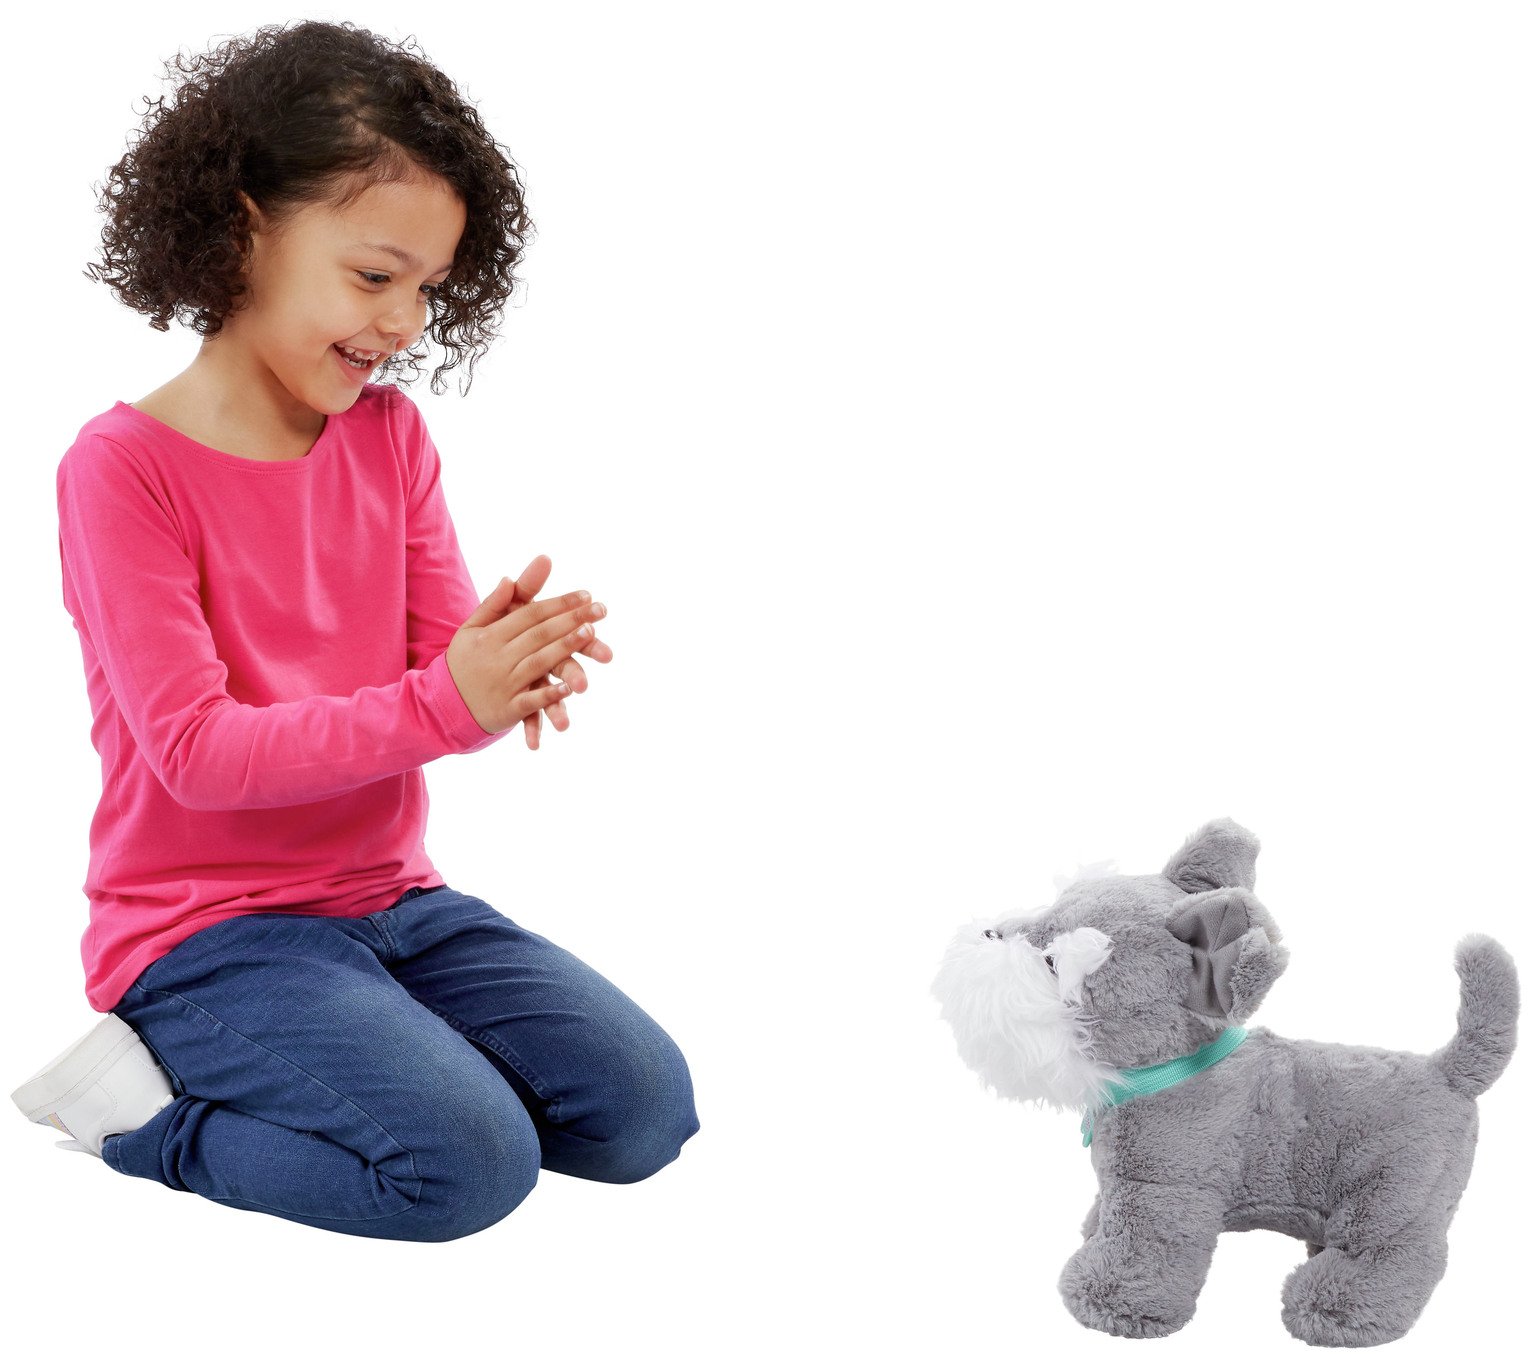 AniMagic Scoot the Puppy Soft Toy Review